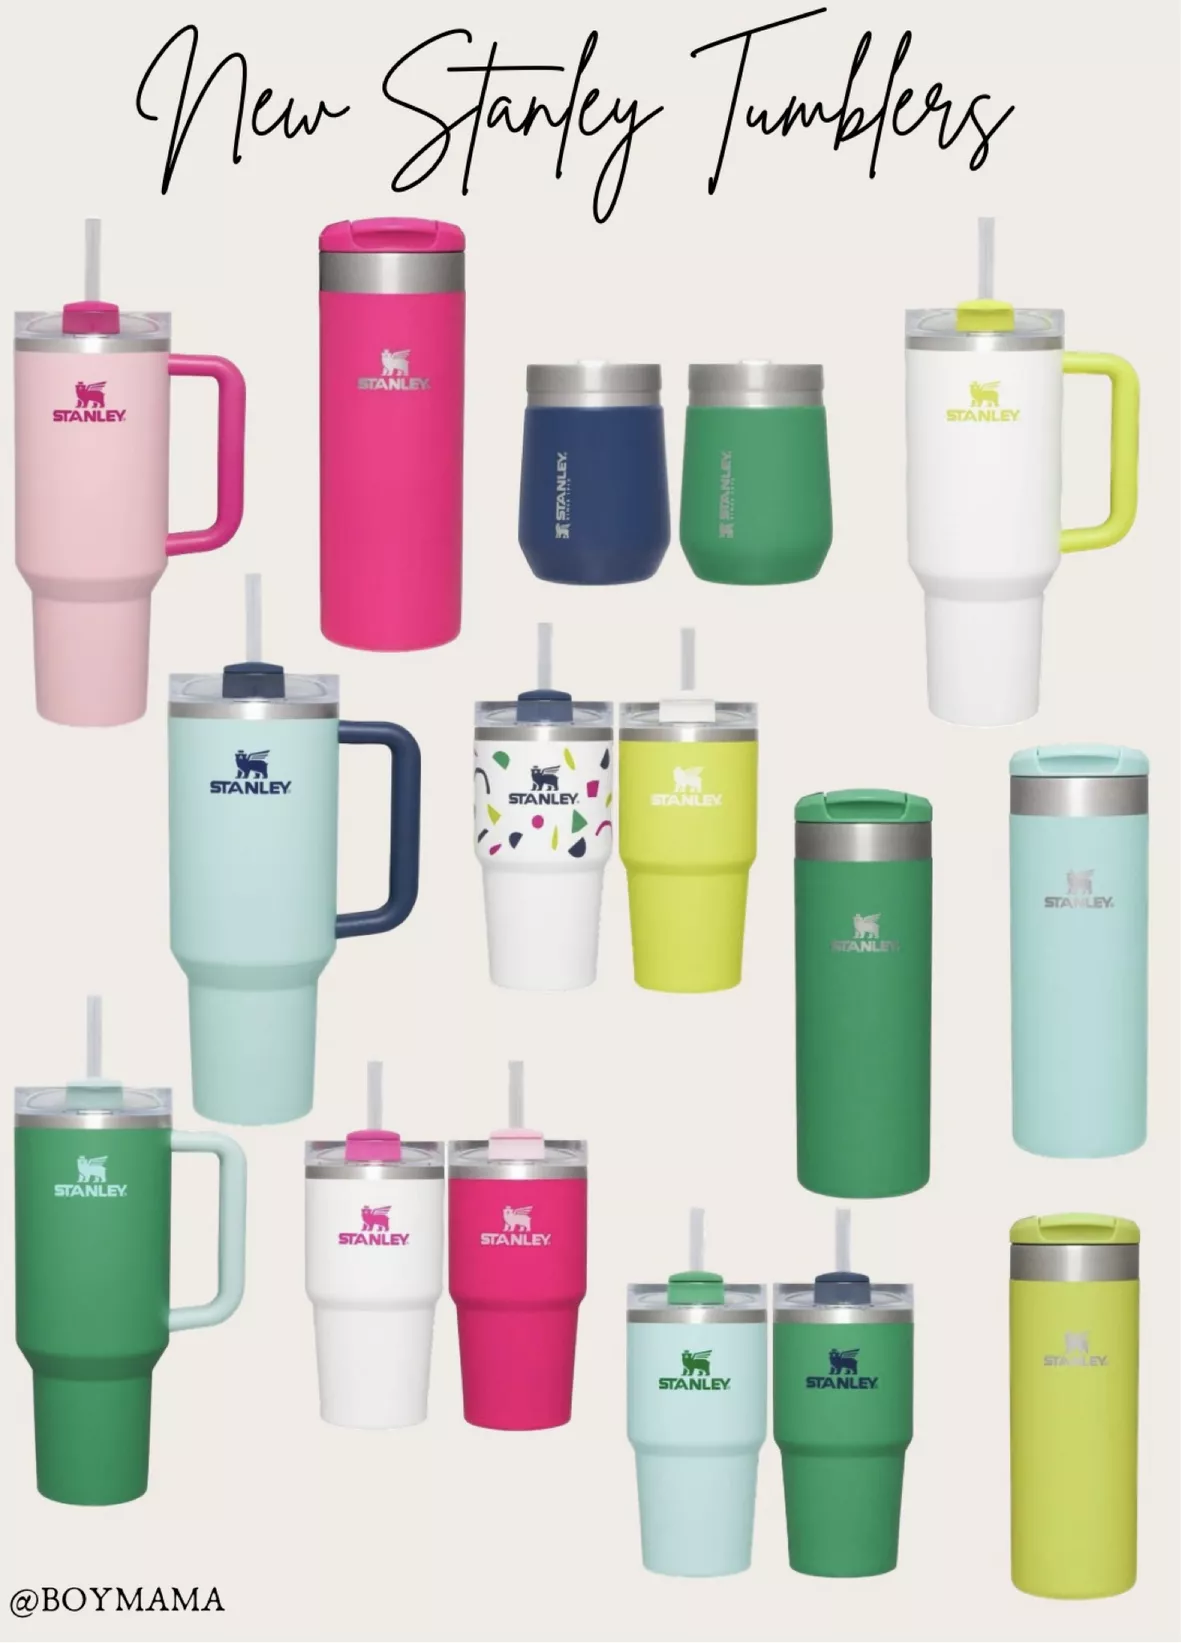 Stanley tumbler restock: Snag 5 popular colors and 2 new ones